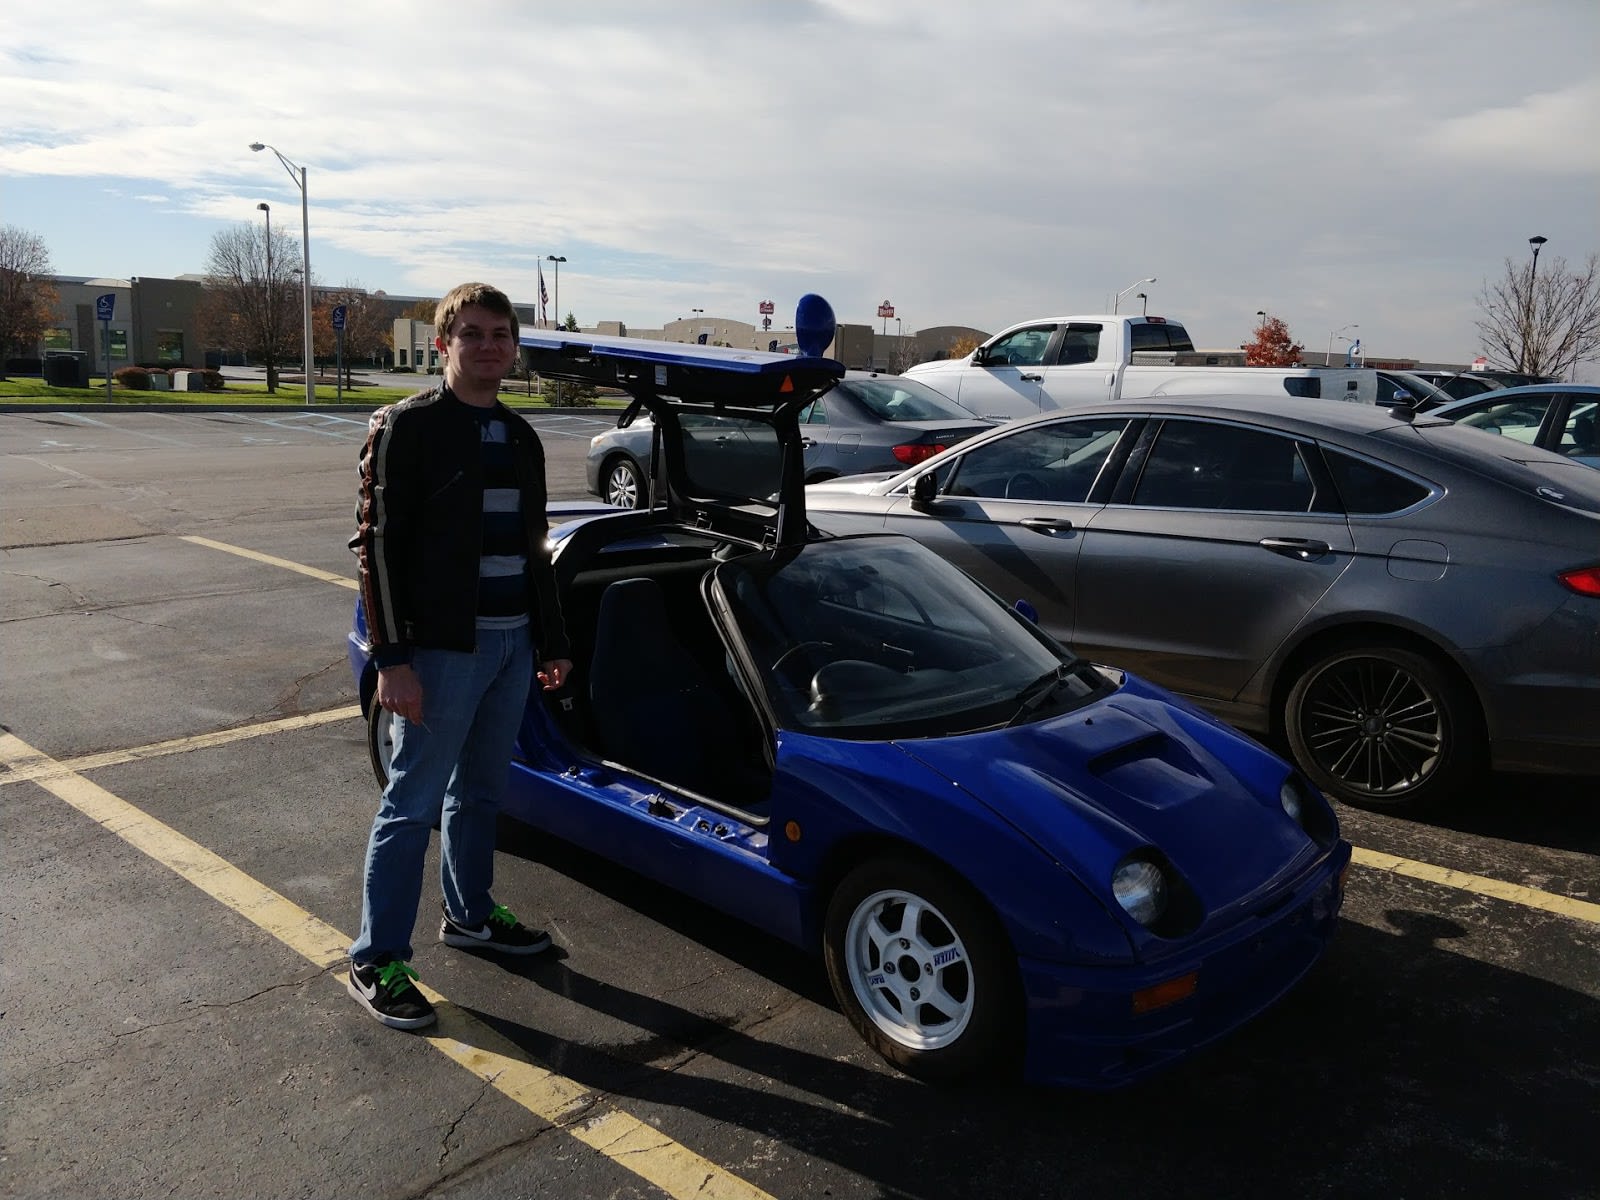 Autozam with a me for scale.